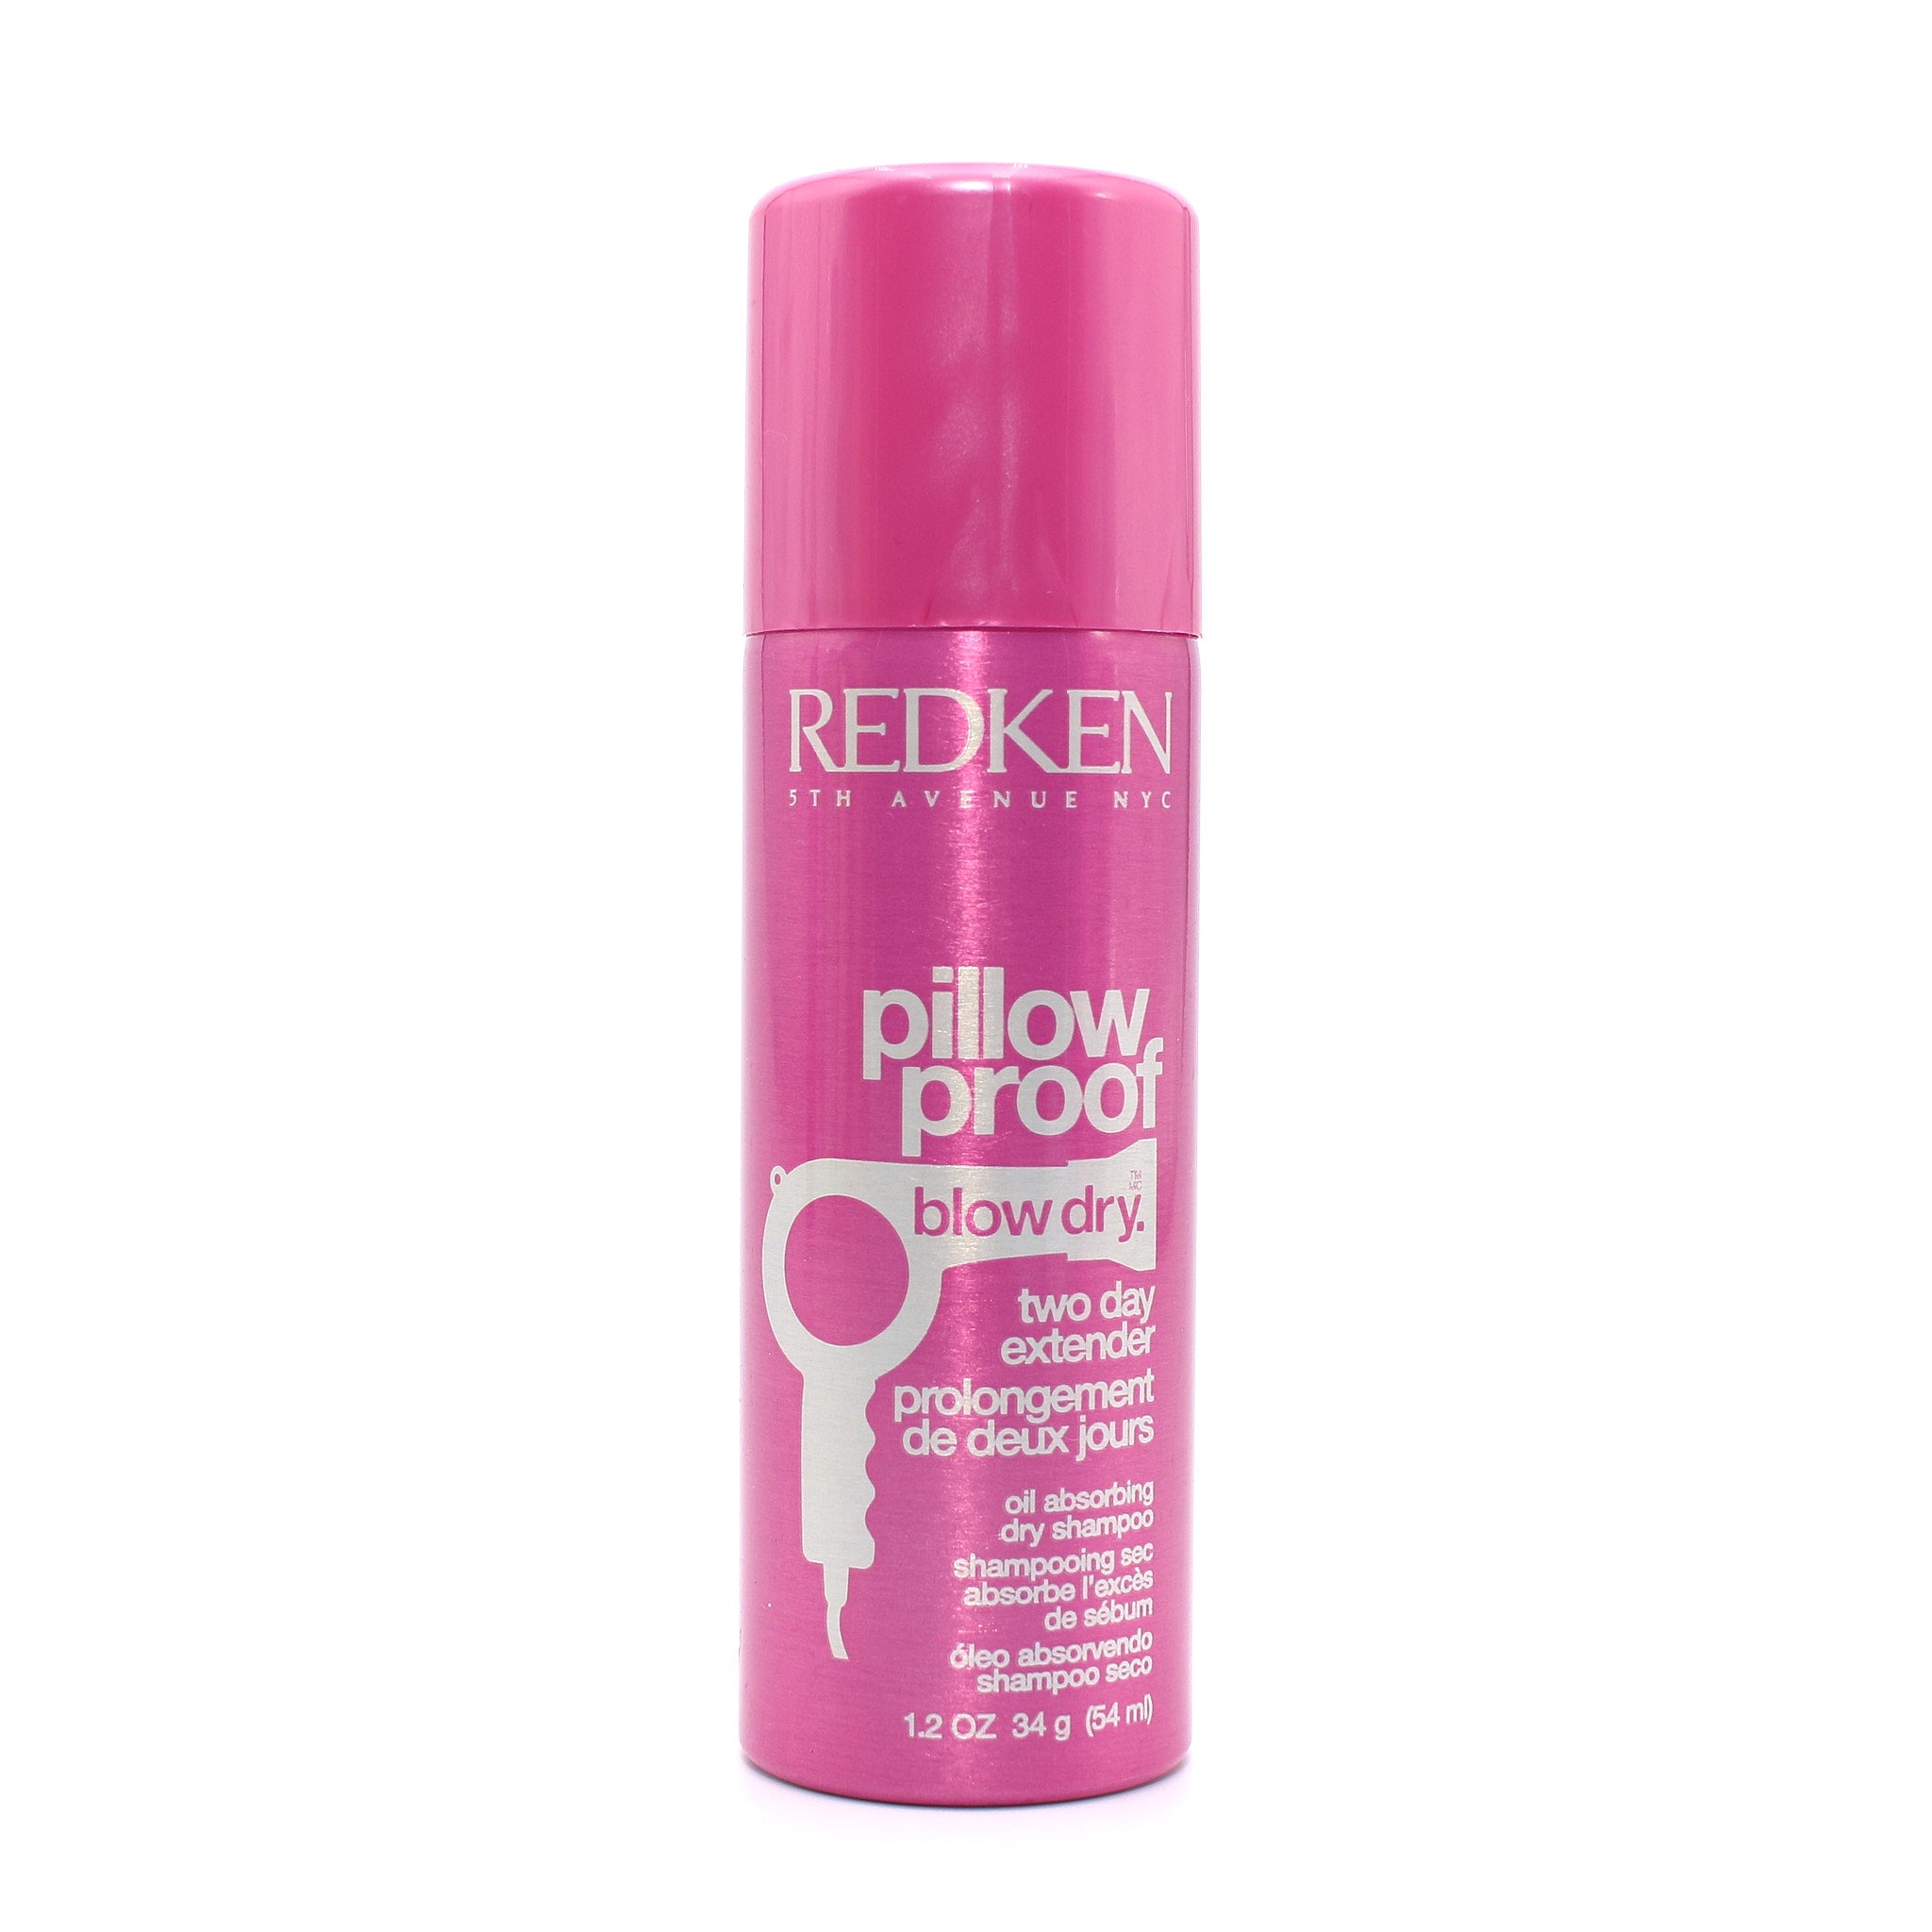 REDKEN Pillow Proof Blow Dry Two Day Extender Dry Shampoo 1.2 oz